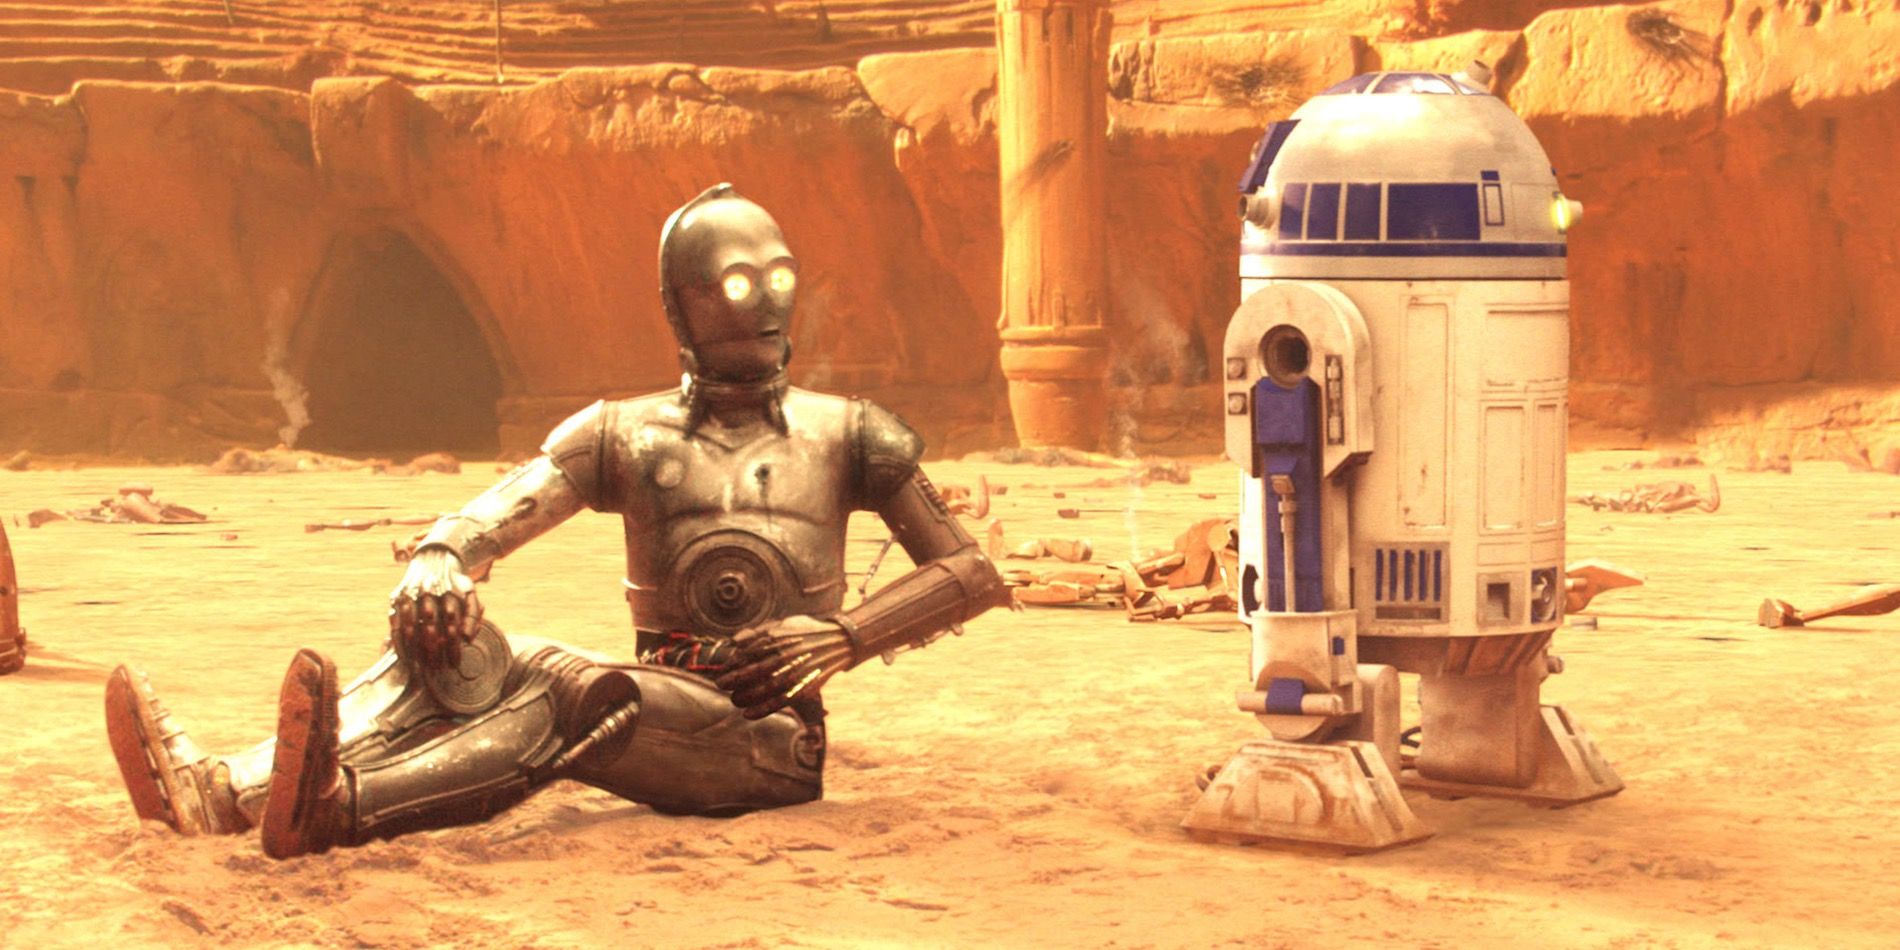 C-3PO and R2-D2 at the Battle of Geonosis in Star Wars Movies